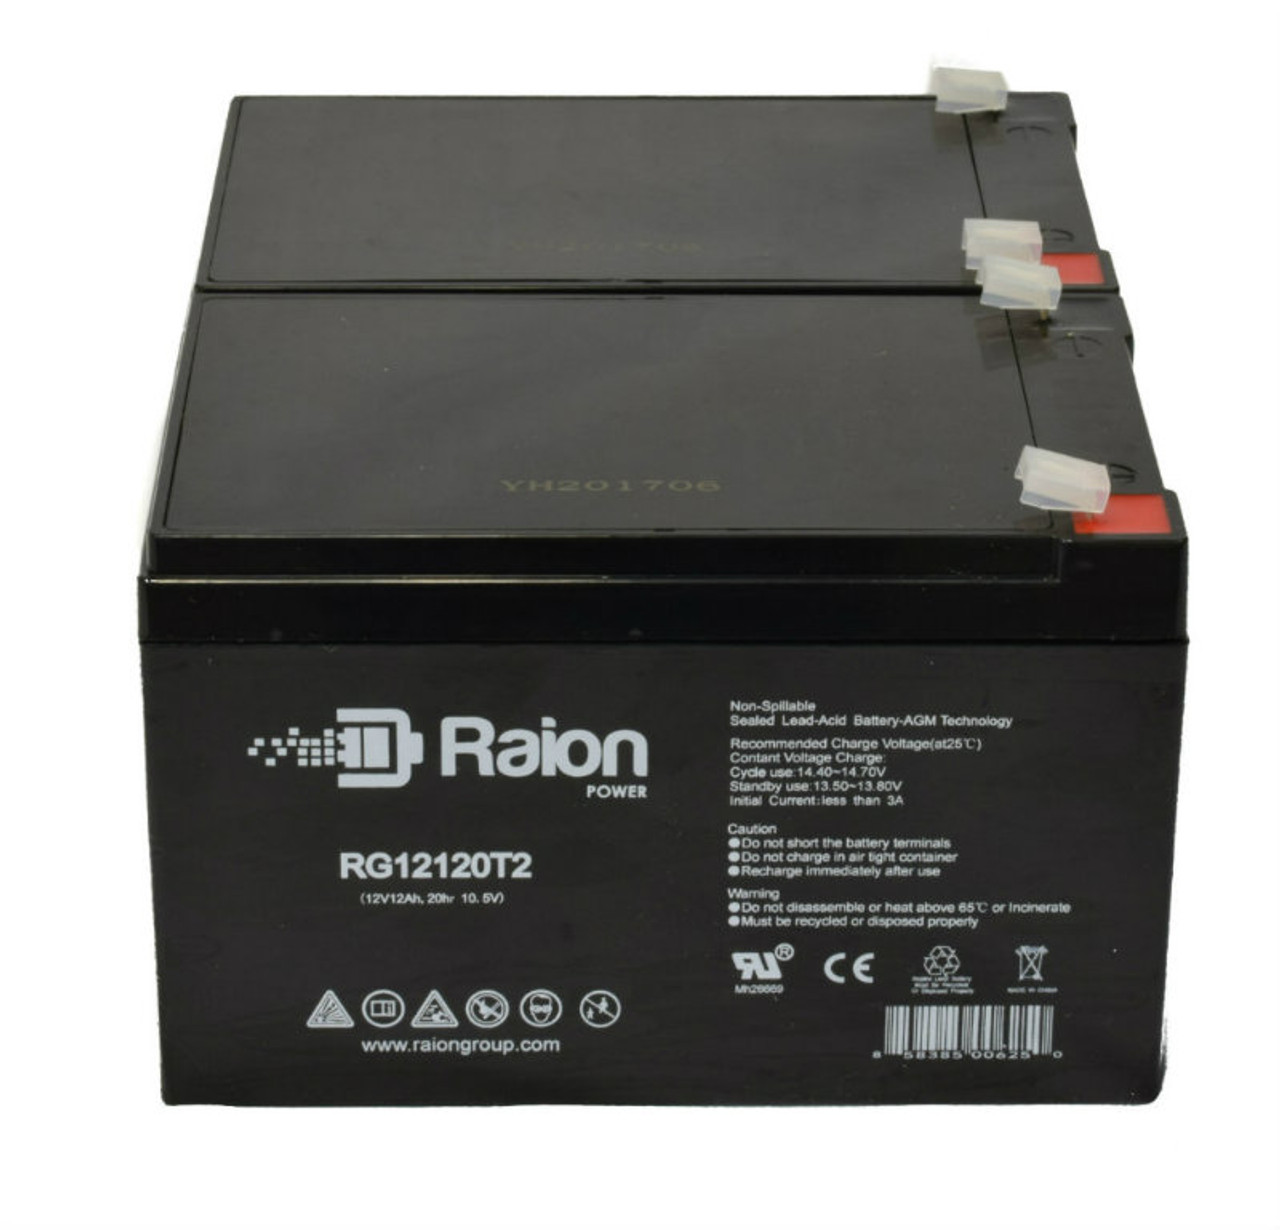 Raion Power RG12120T2 Replacement Battery Set for Hoveround Activa Mobility Scooter - 2 Pack